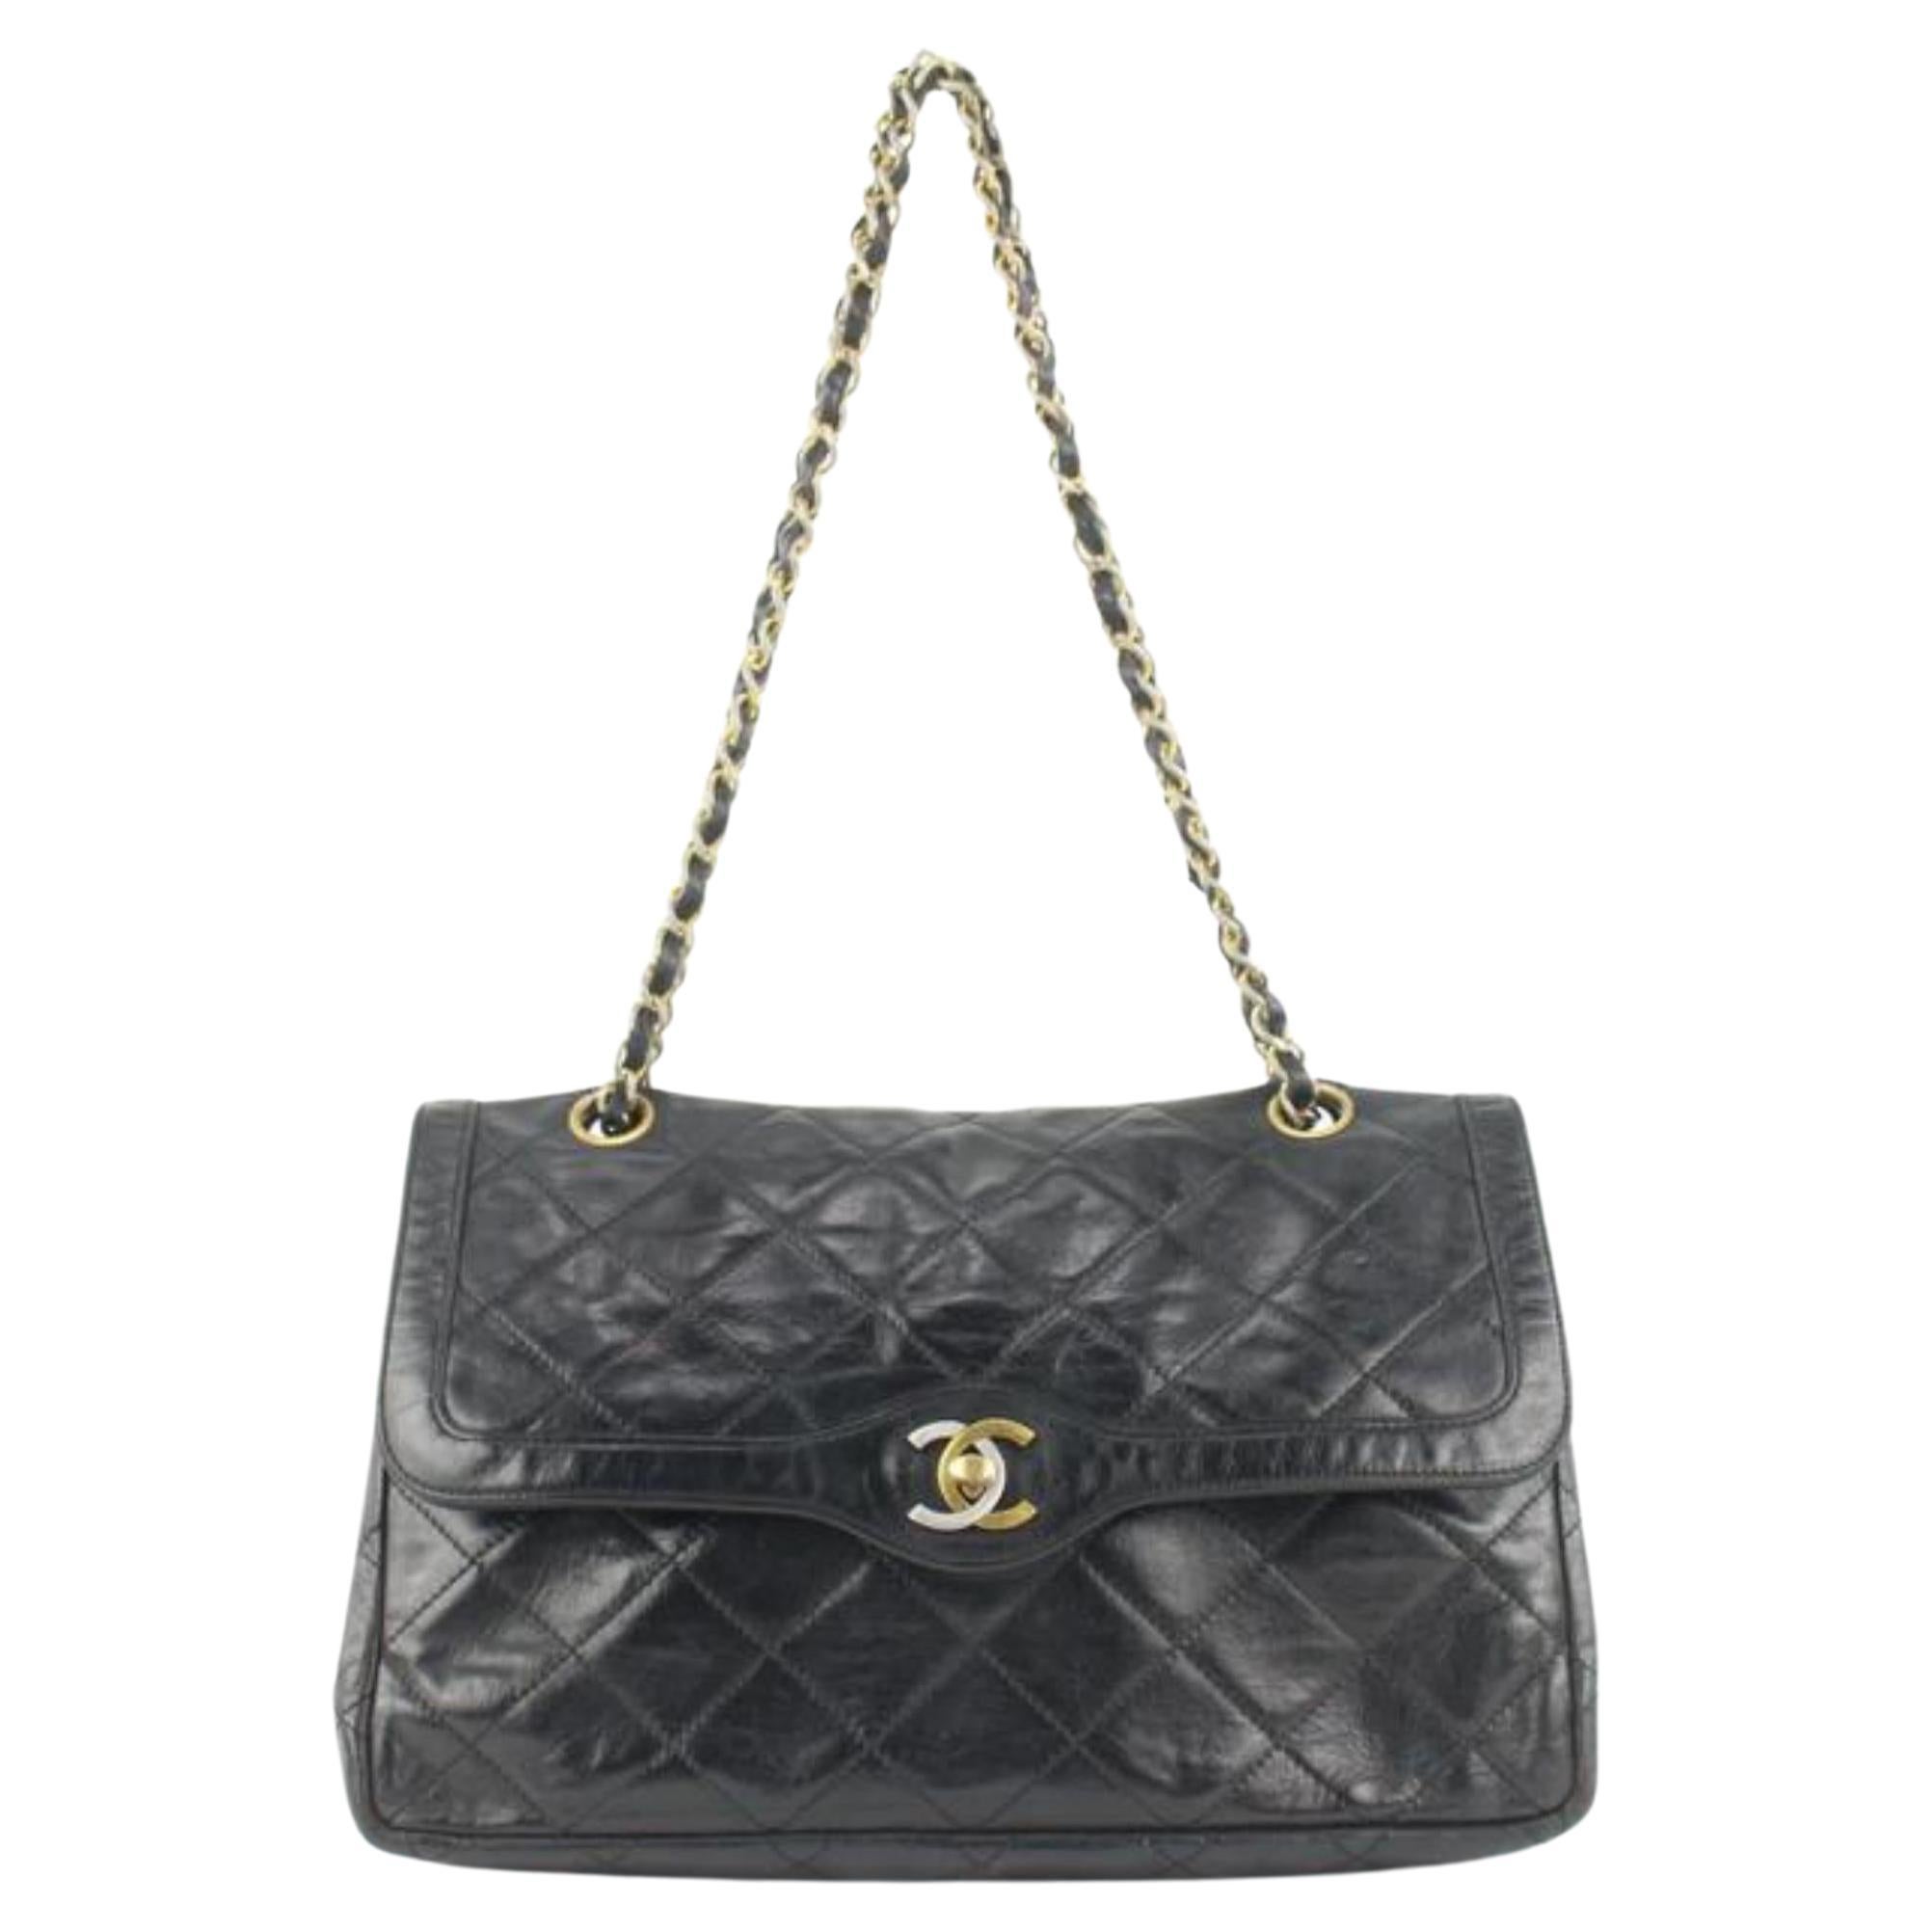 Chanel wrinkled Lambskin wild stitched flap large bag with silver